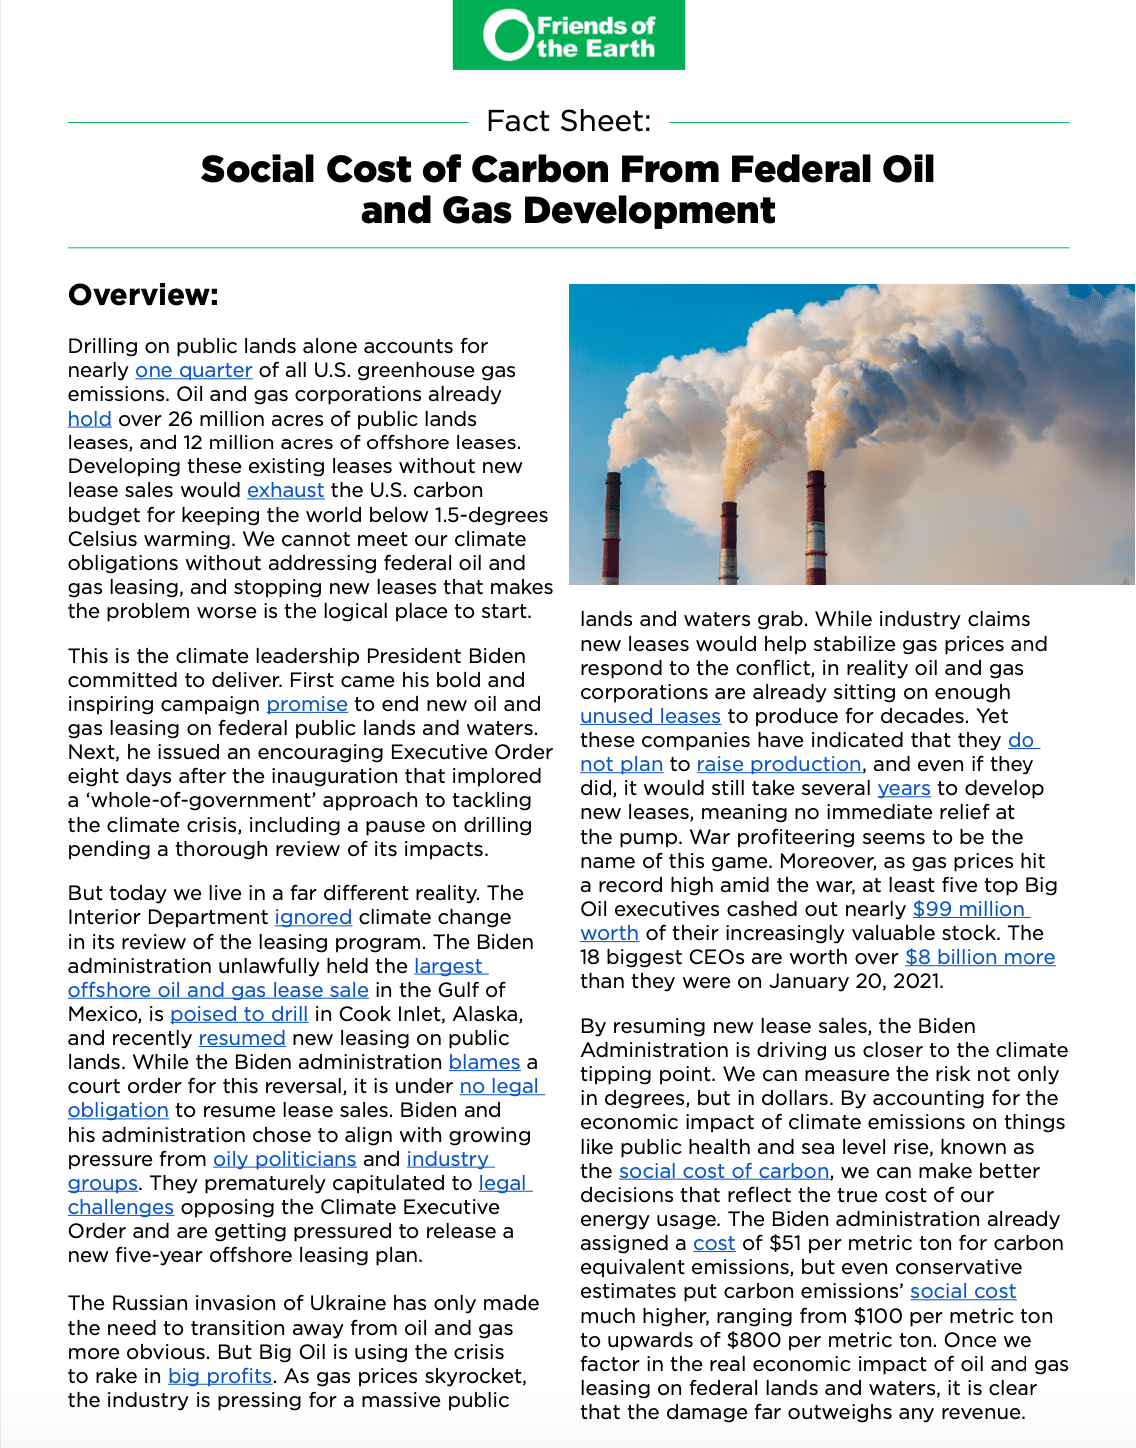 Social Cost of Carbon From Federal Oil and Gas Development